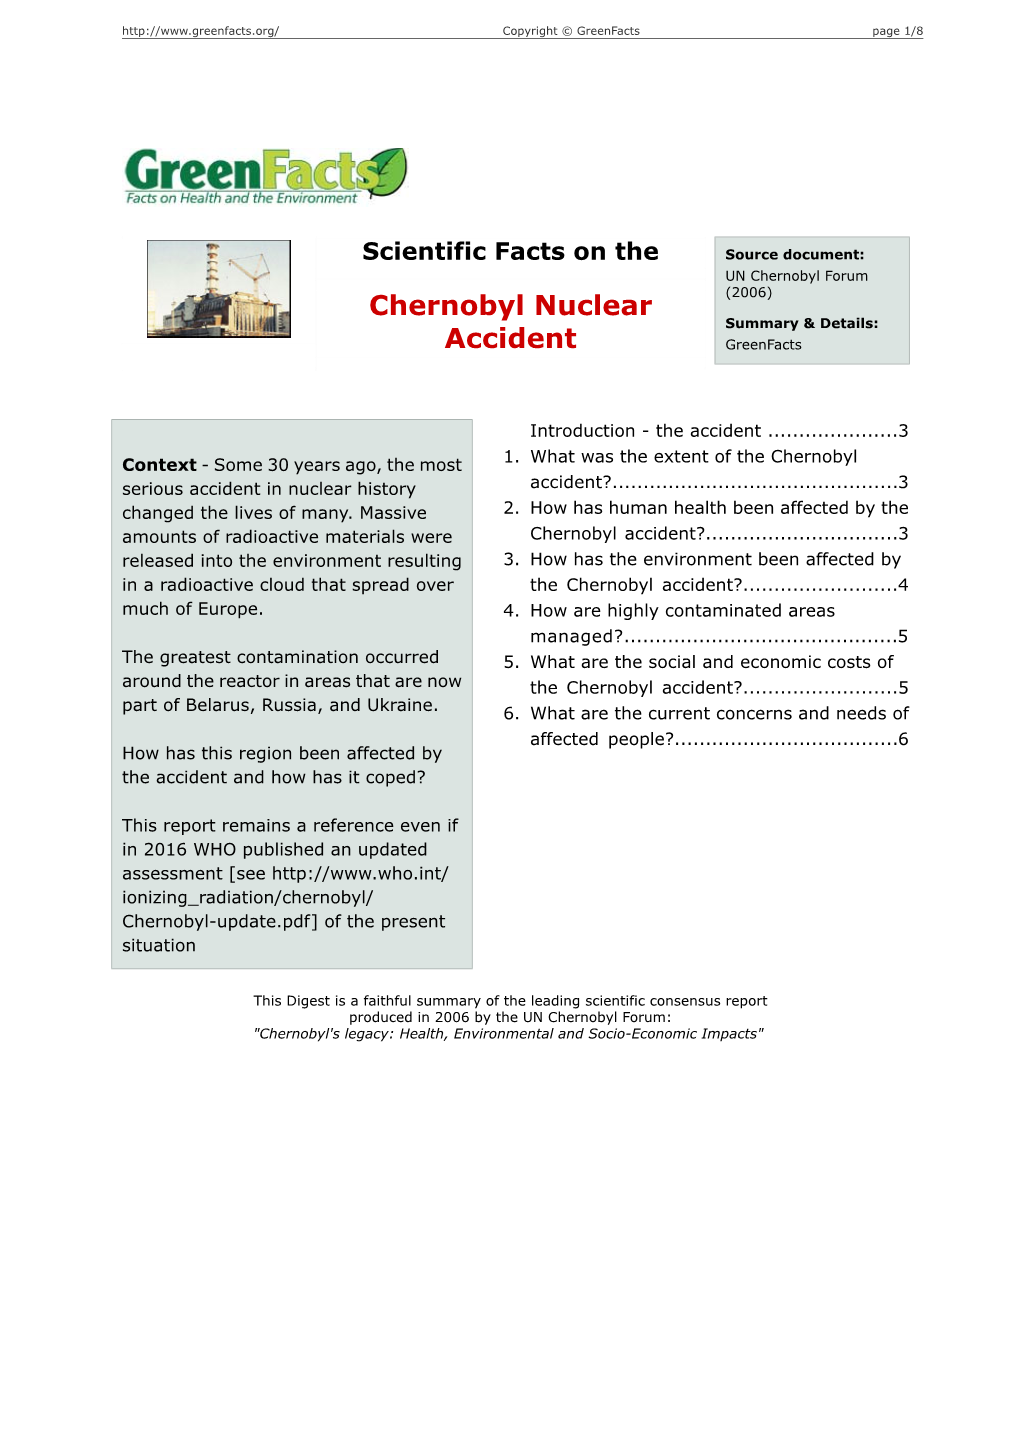 Scientific Facts on the Chernobyl Nuclear Accident